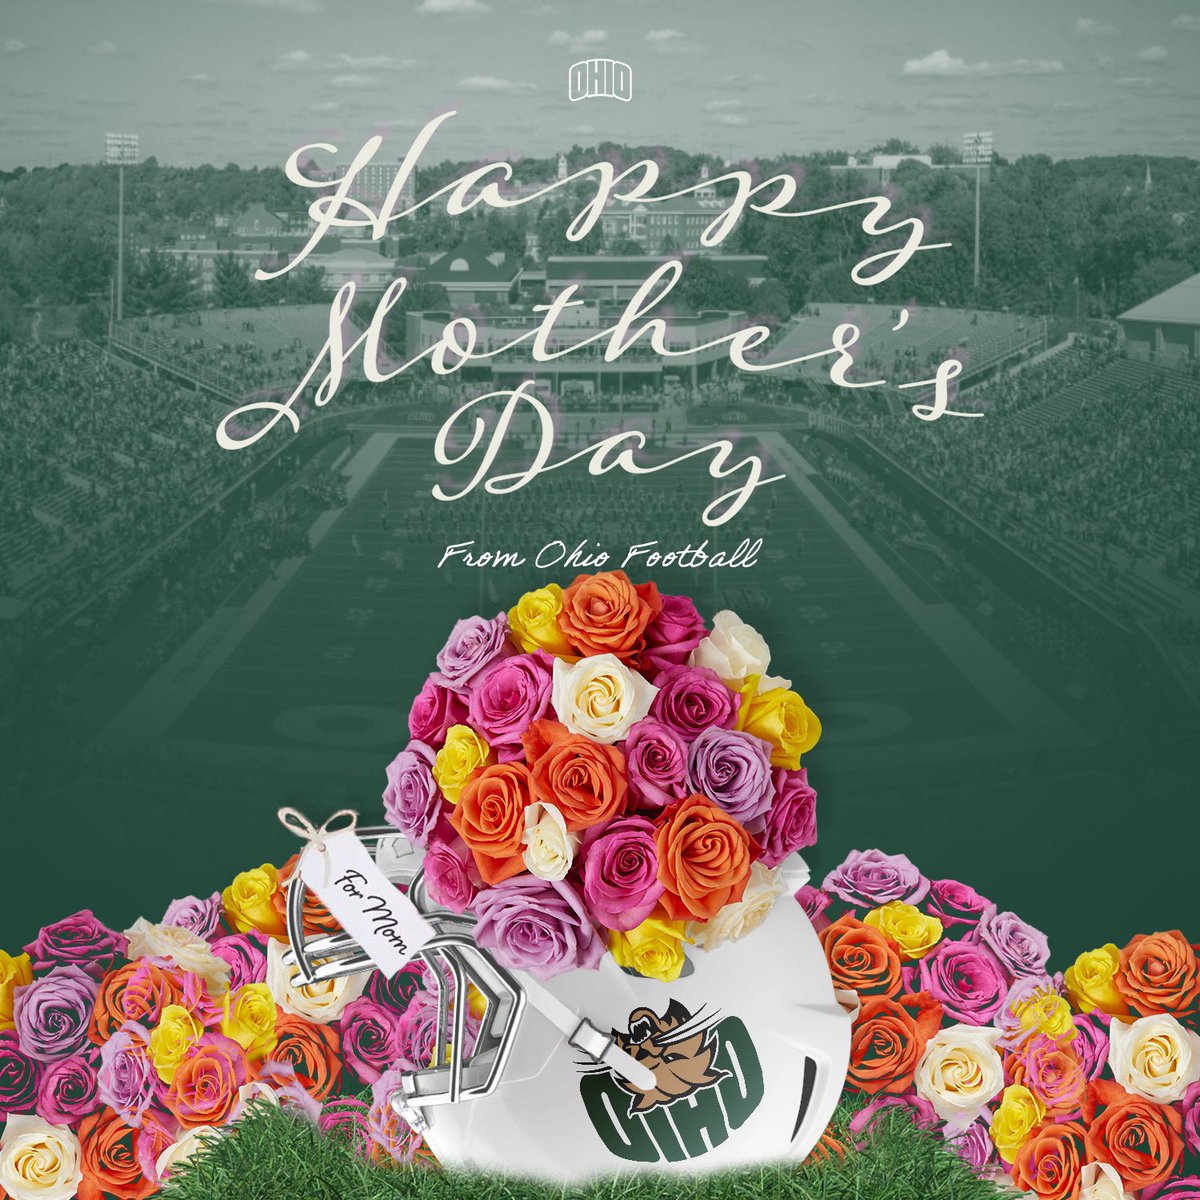 We would like to wish a Happy Mother’s Day to all of the Moms out there. Have a wonderful day. We appreciate all that you do for us!!